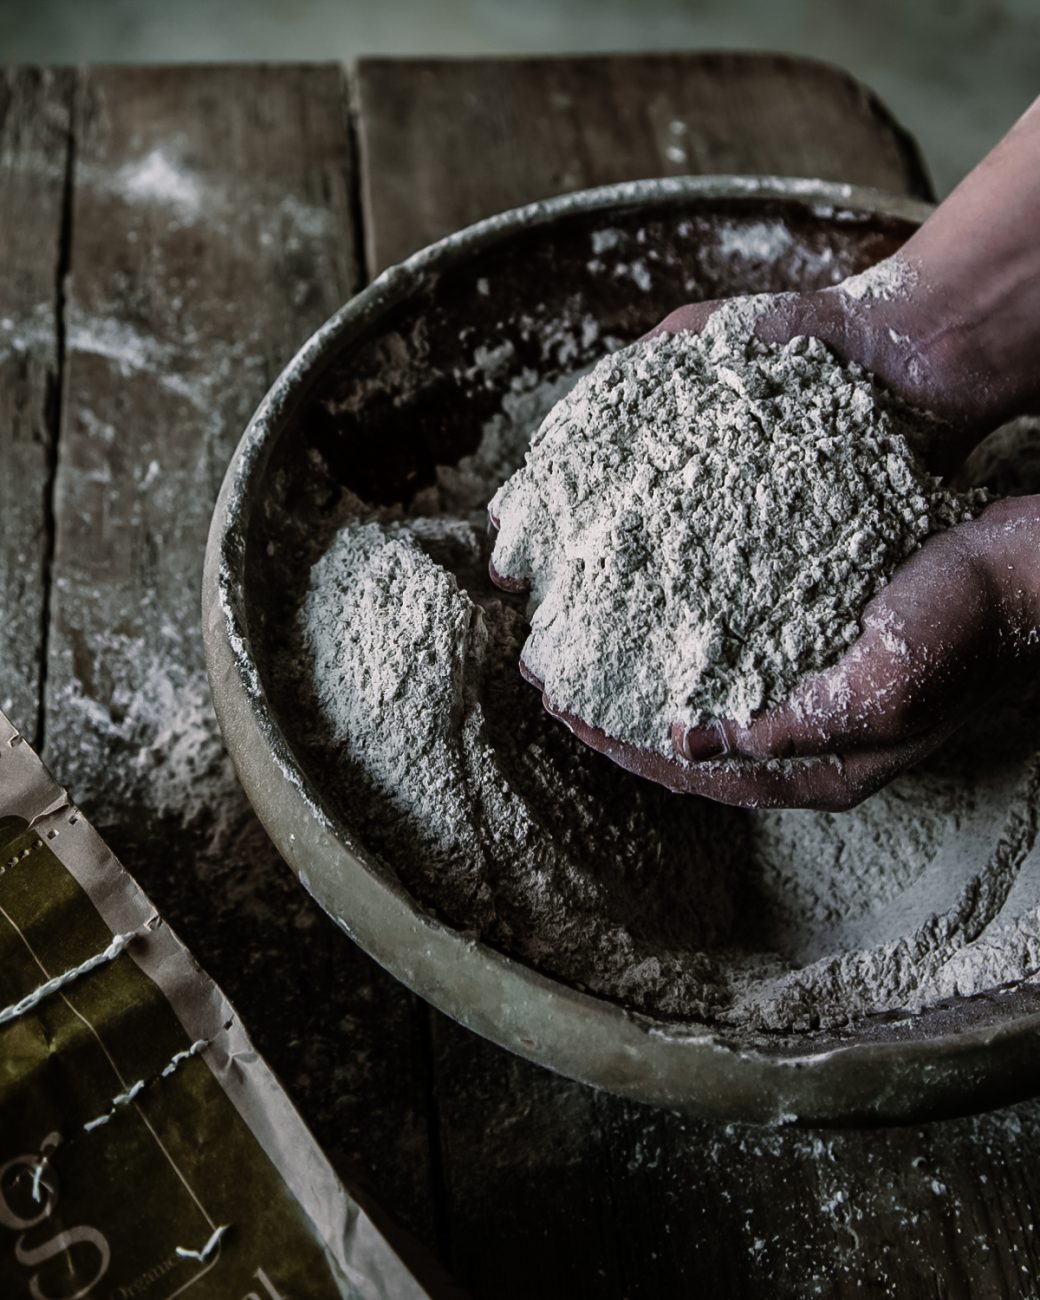 Freshly-milled flour scooped up in a baker's hands ready for use